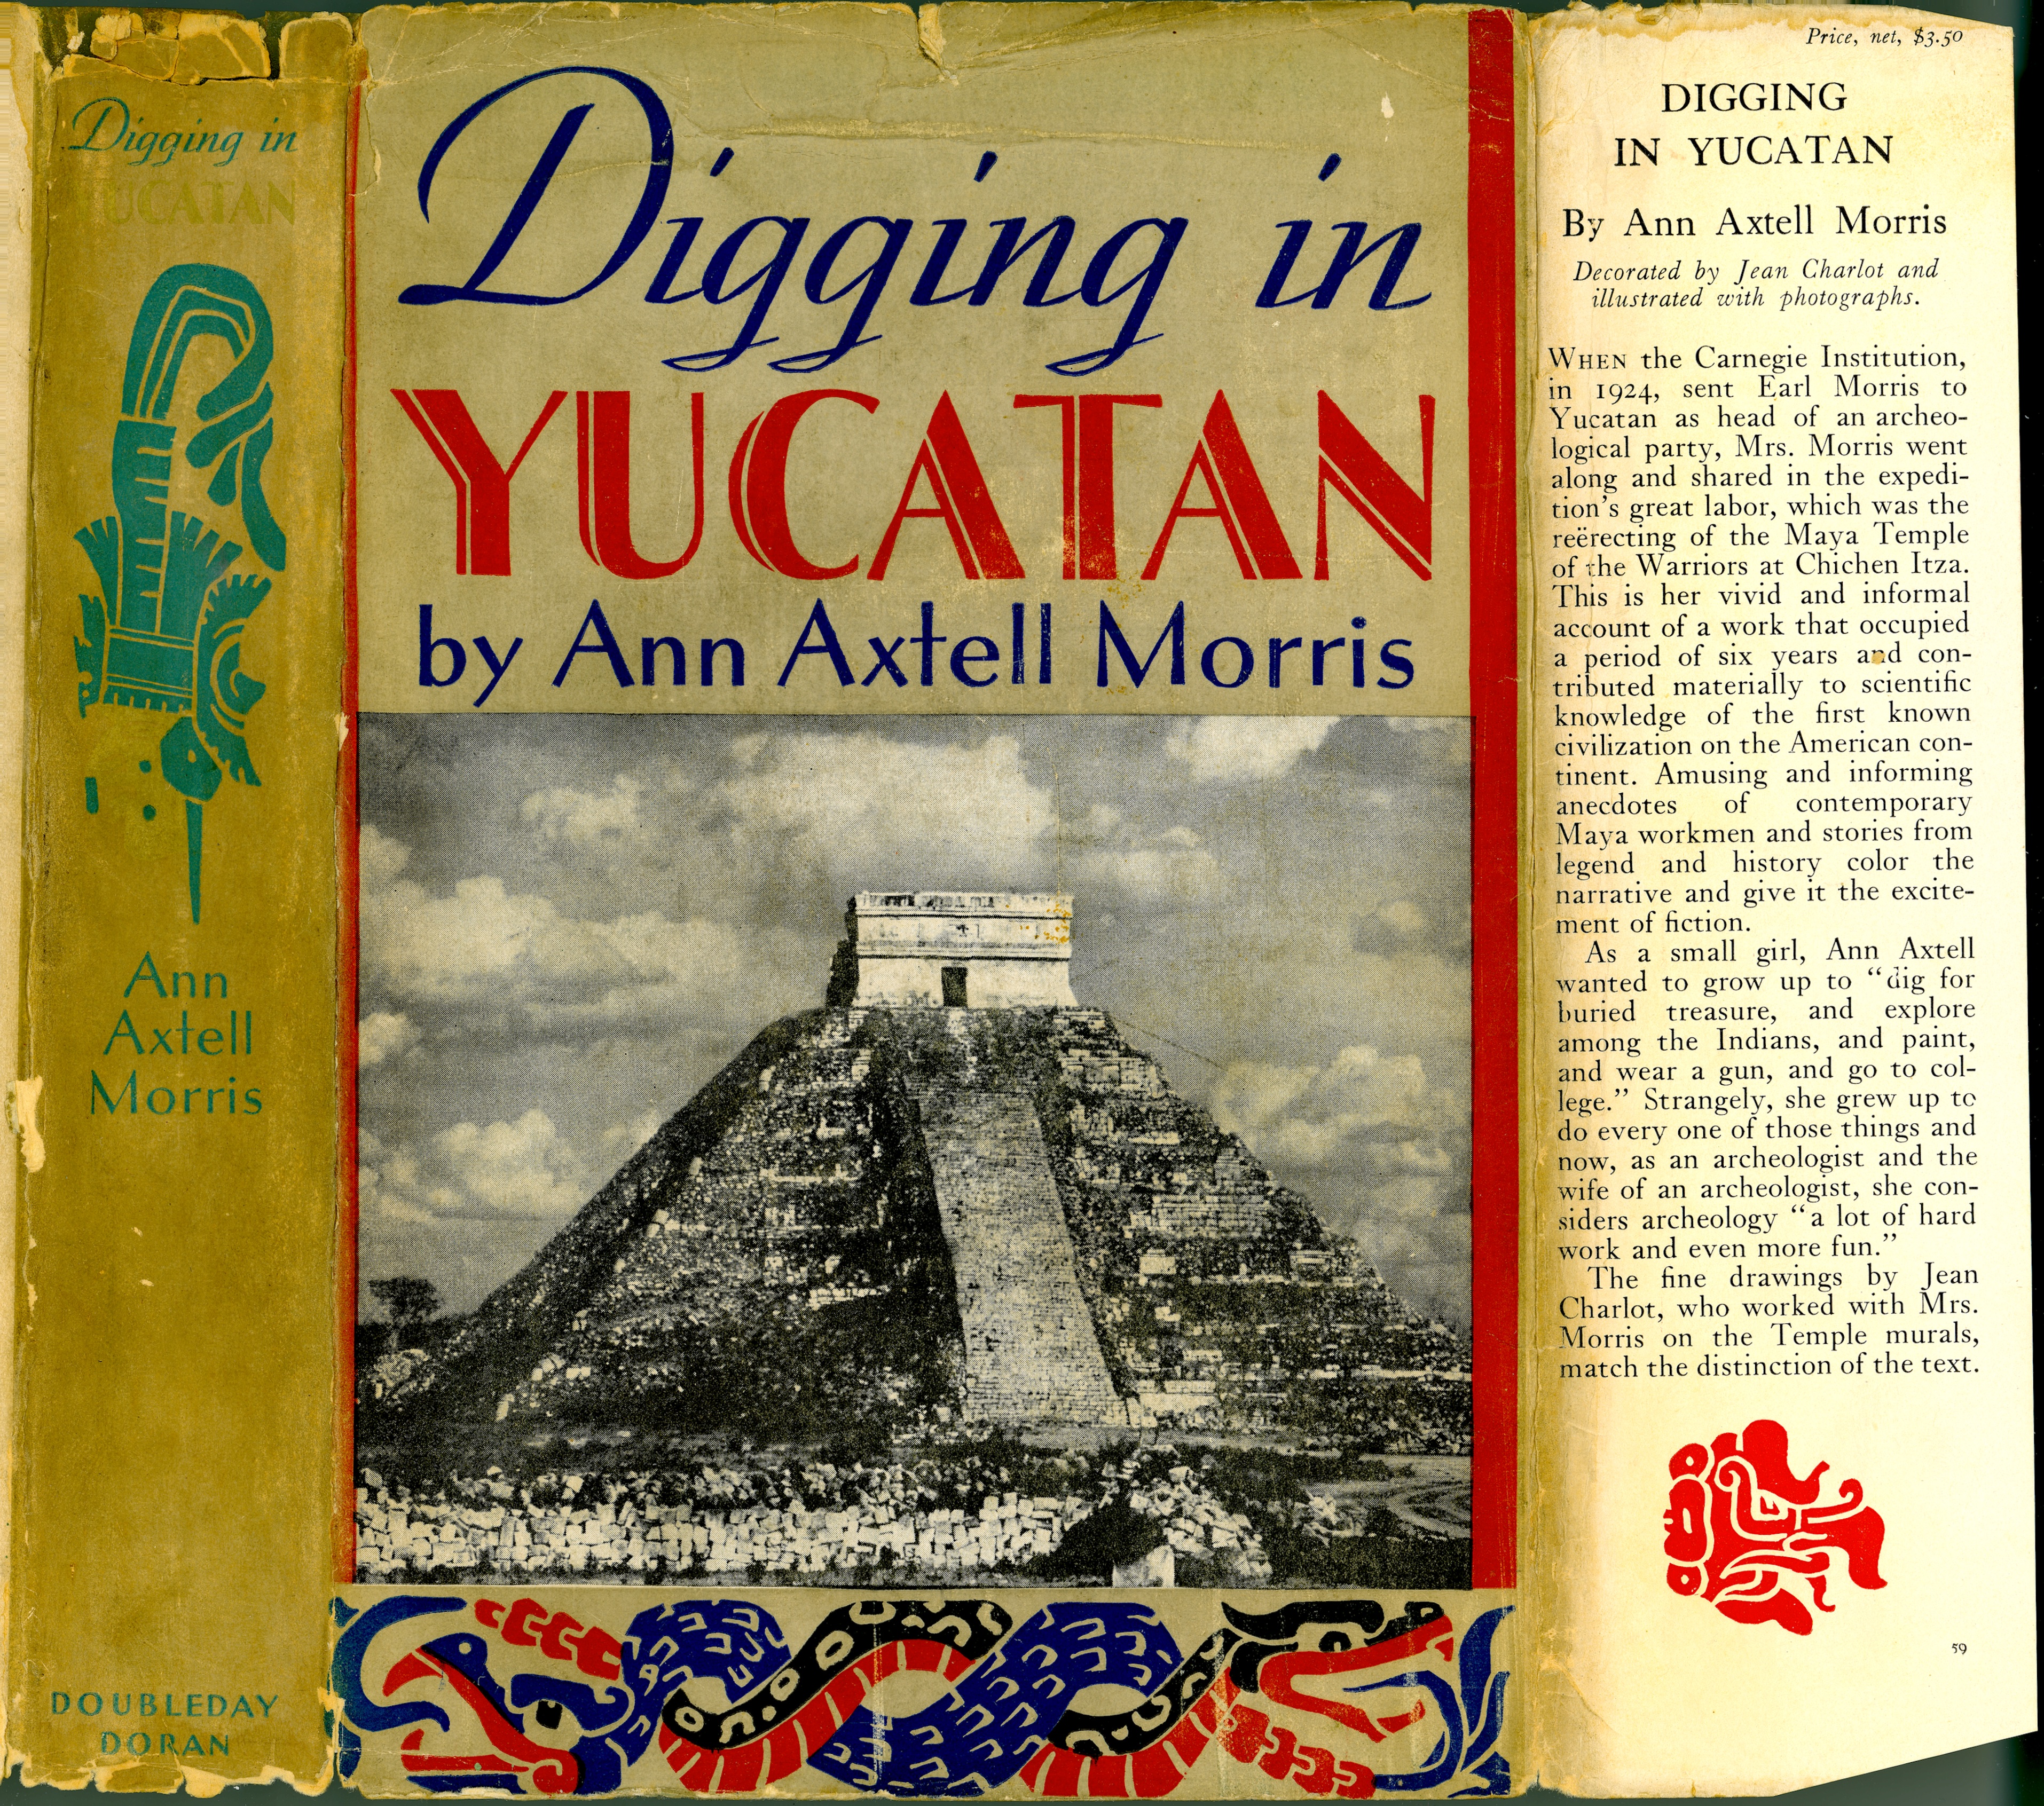 Book jacket for 'Digging in Yucatan' written by Ann Axtell Morris.  Decorations by Jean Charlot.